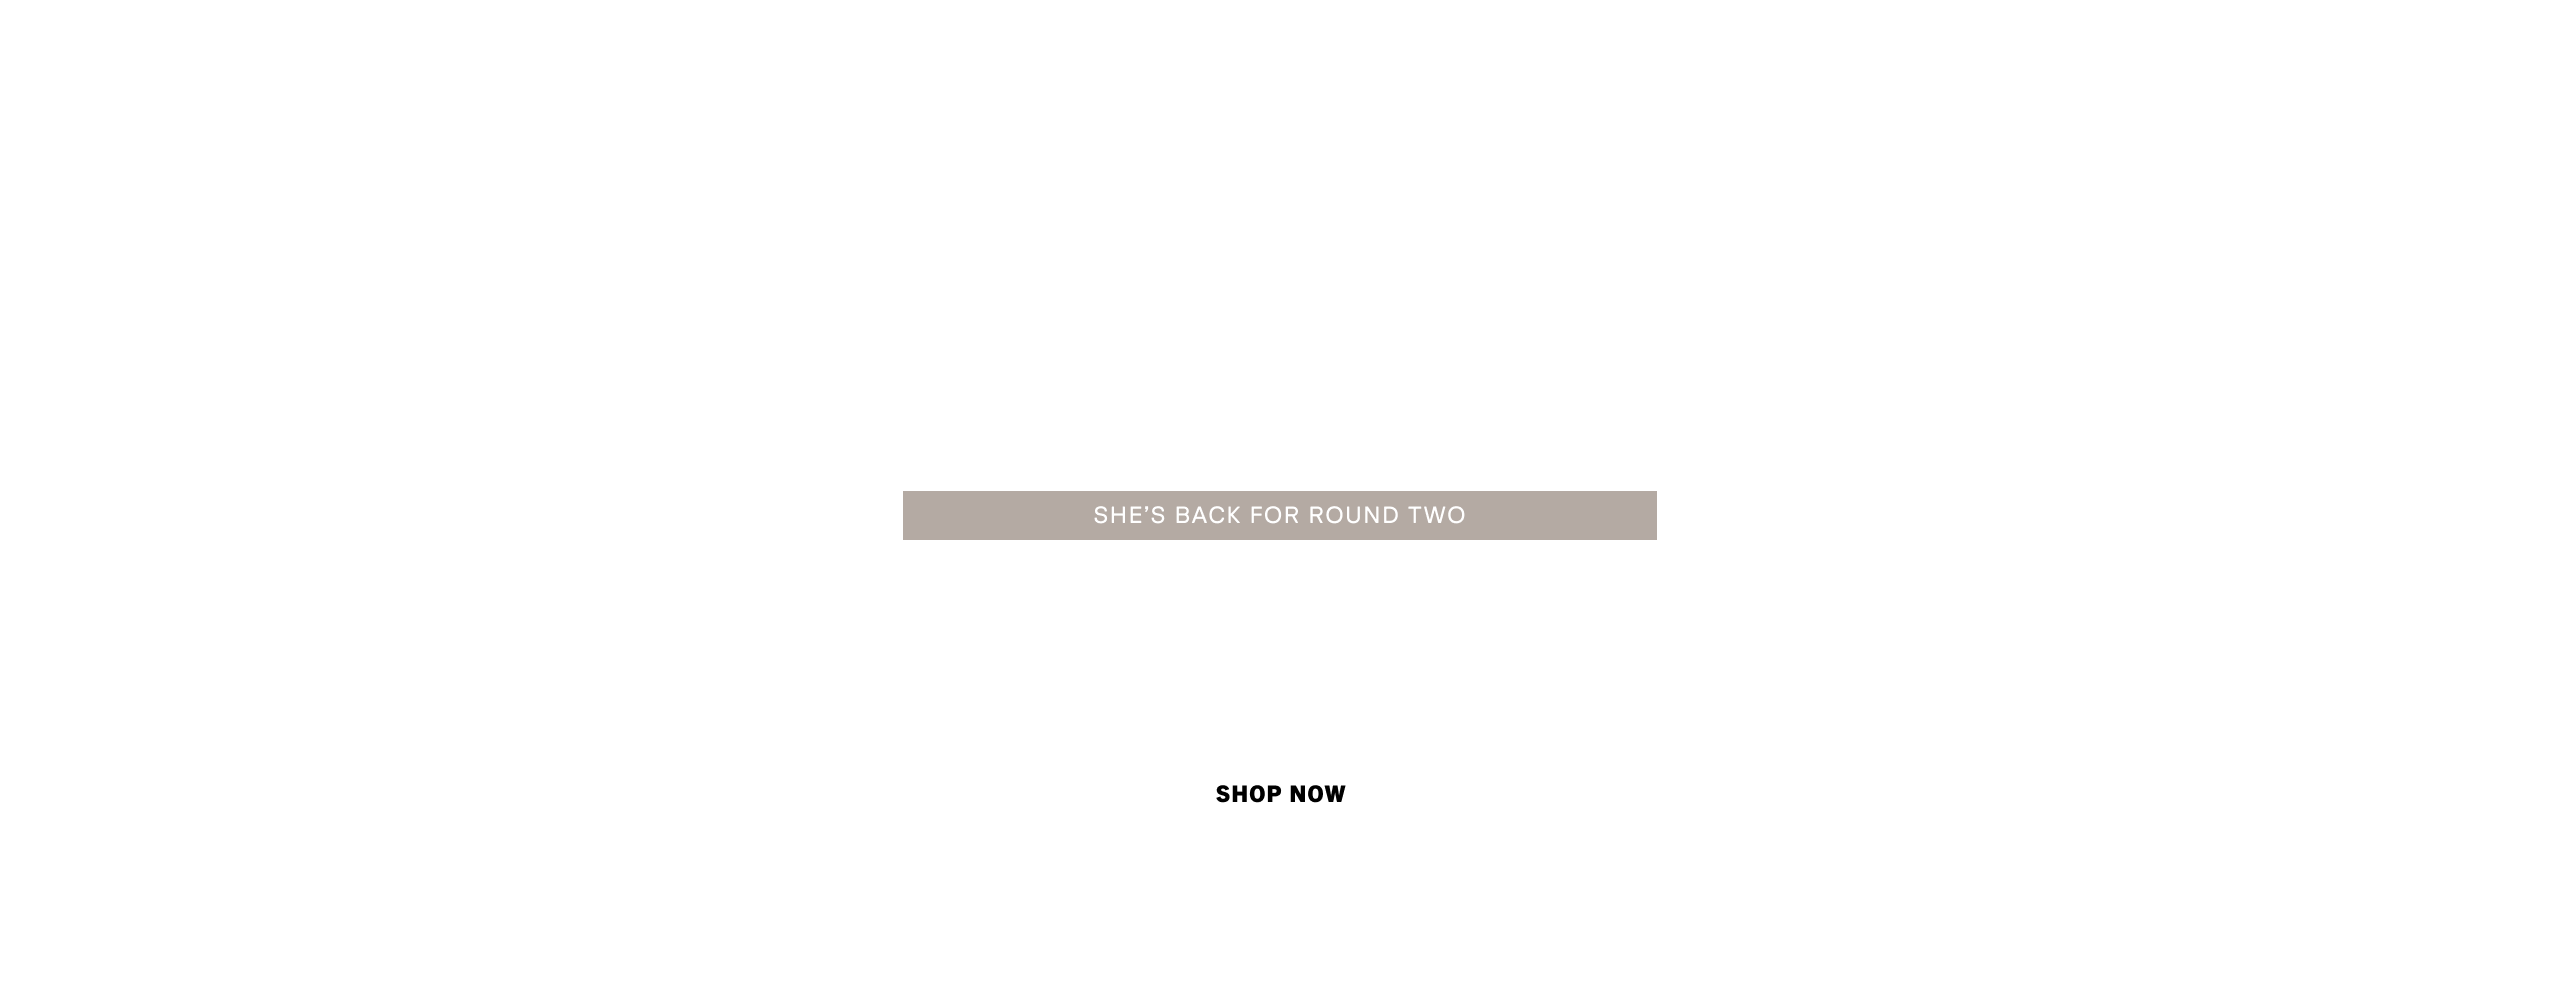 Shop the Khloe edit! She's back for round two! Click to unlock new VIP offers: 2 for $24 bottoms + 70% off everything.